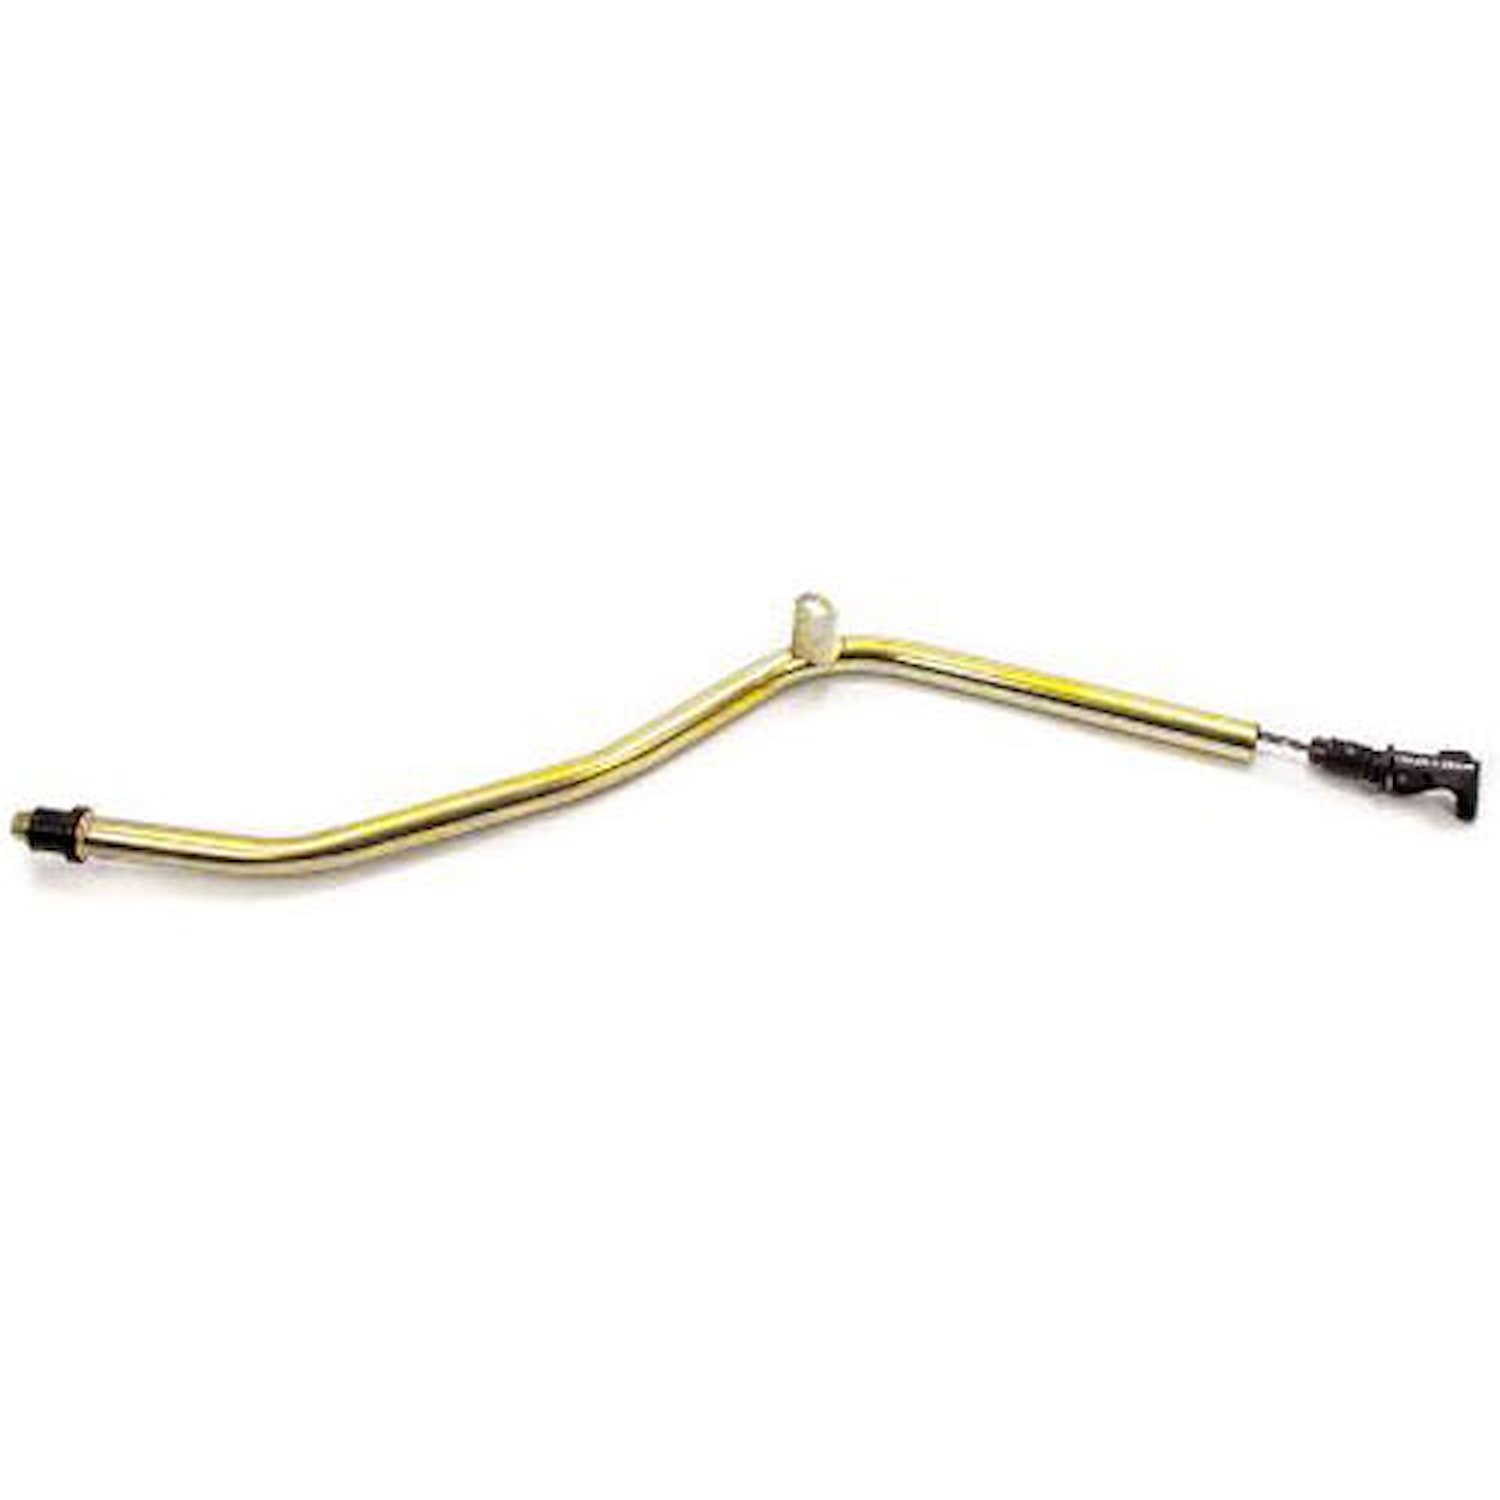 Locking-Style Transmission Dipstick Assembly GM TH350 - Chevy